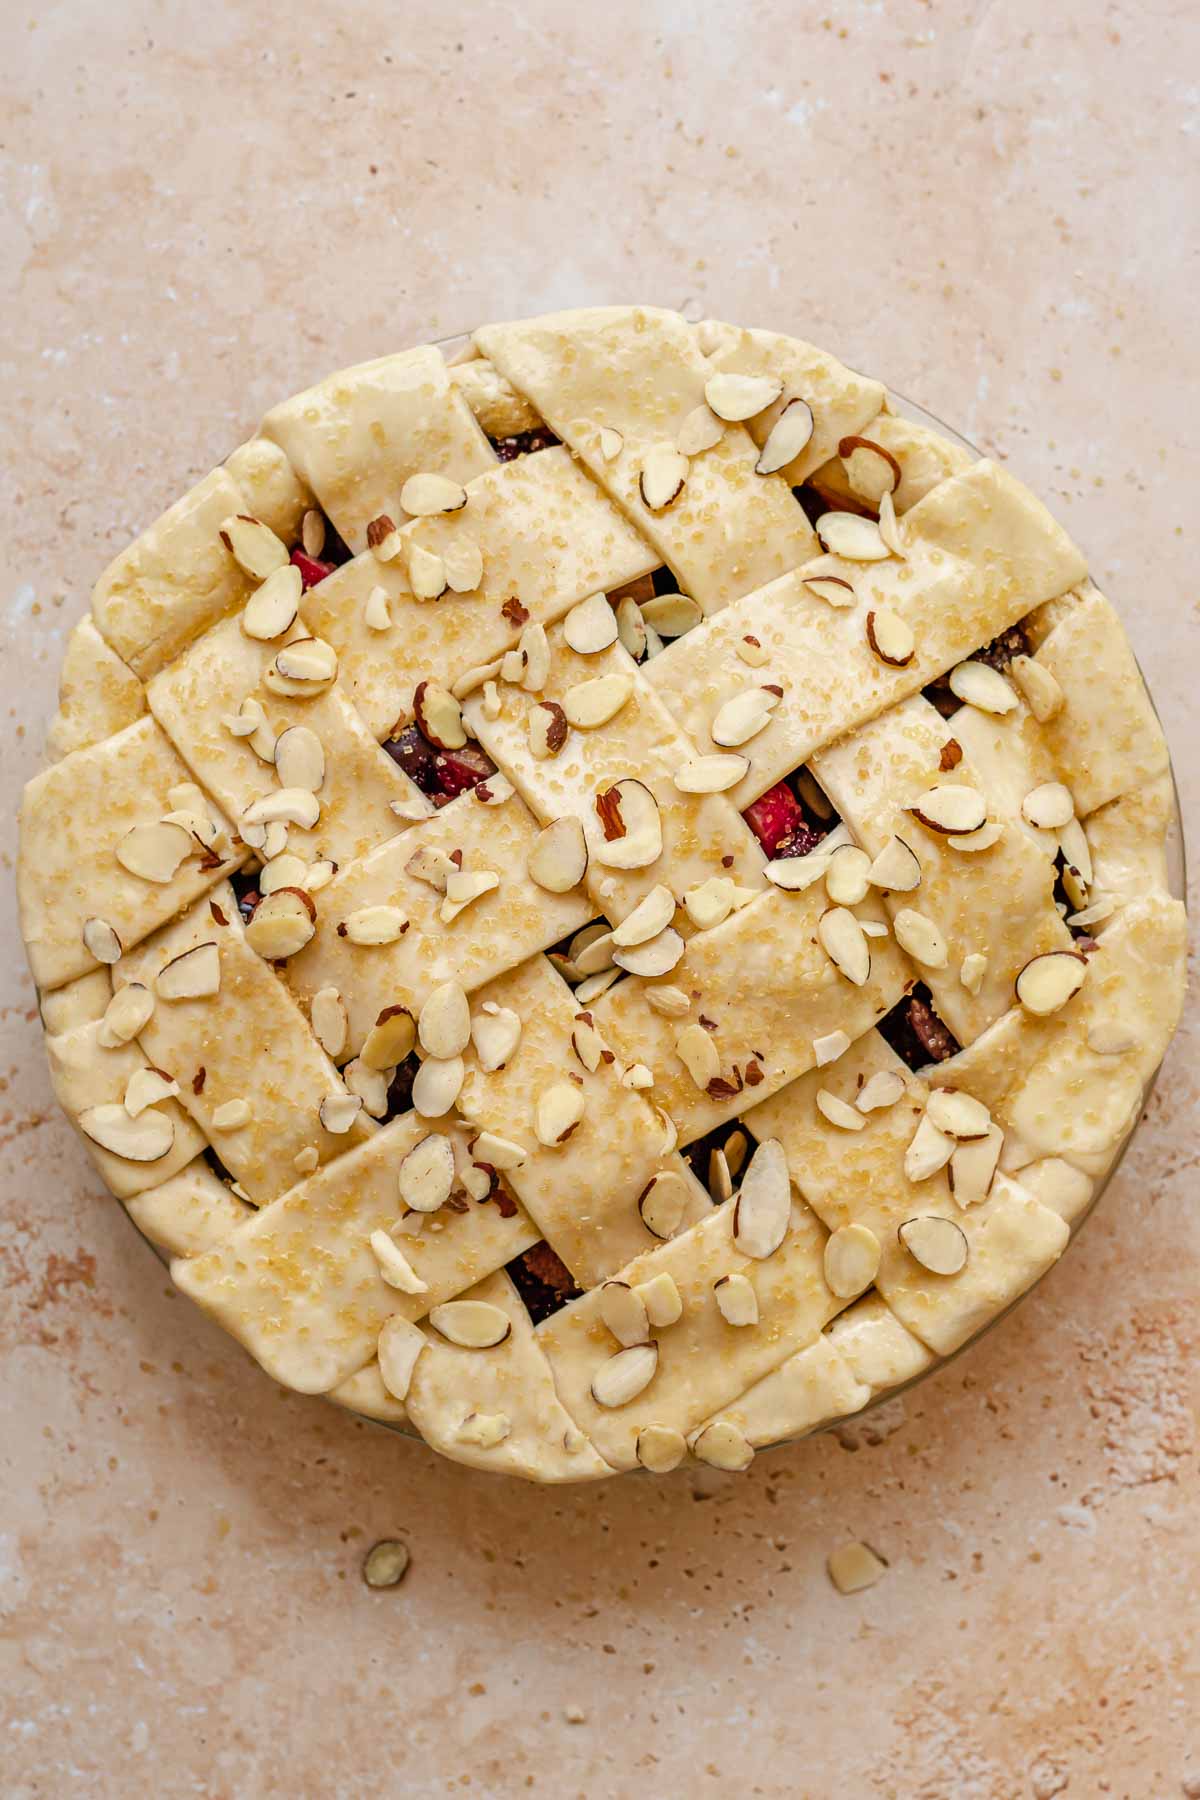 Pre-baked cherry rhubarb pie with coarse sugar and sliced almonds on top.